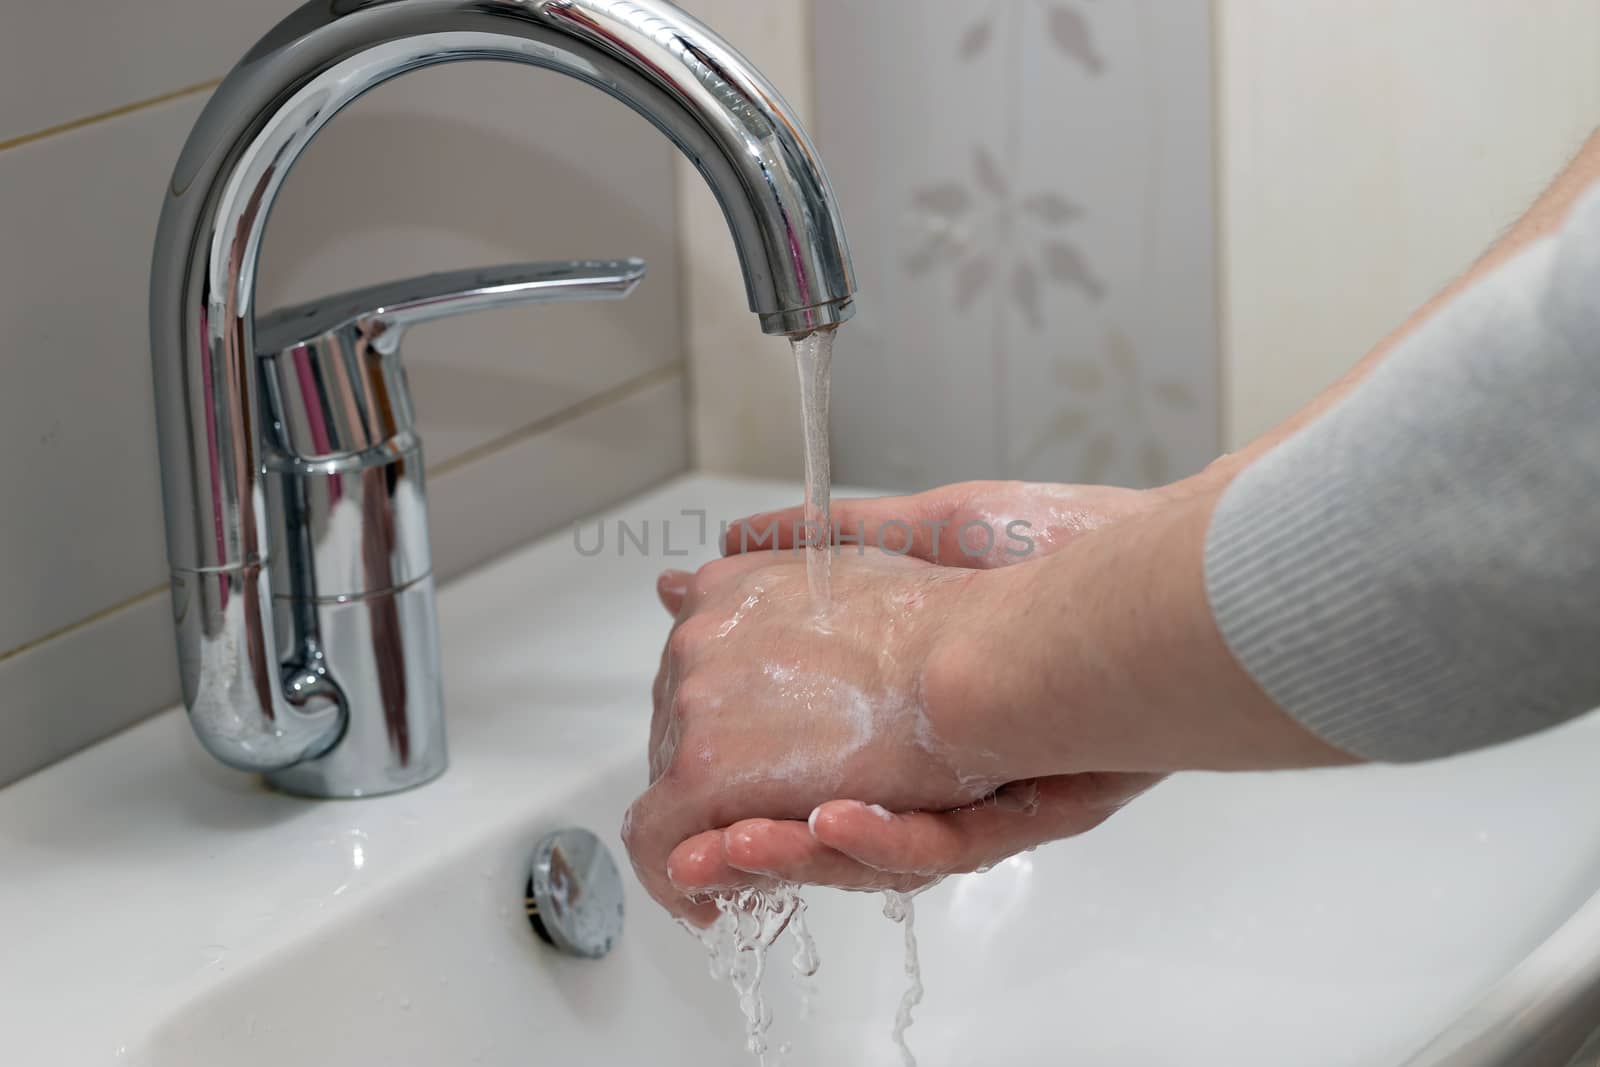 Man washing hands with soap and lathering suds. Protect against the coronavirus. Coronavirus pandemic protection by washing hands frequently. Hygiene to stop spreading coronavirus.